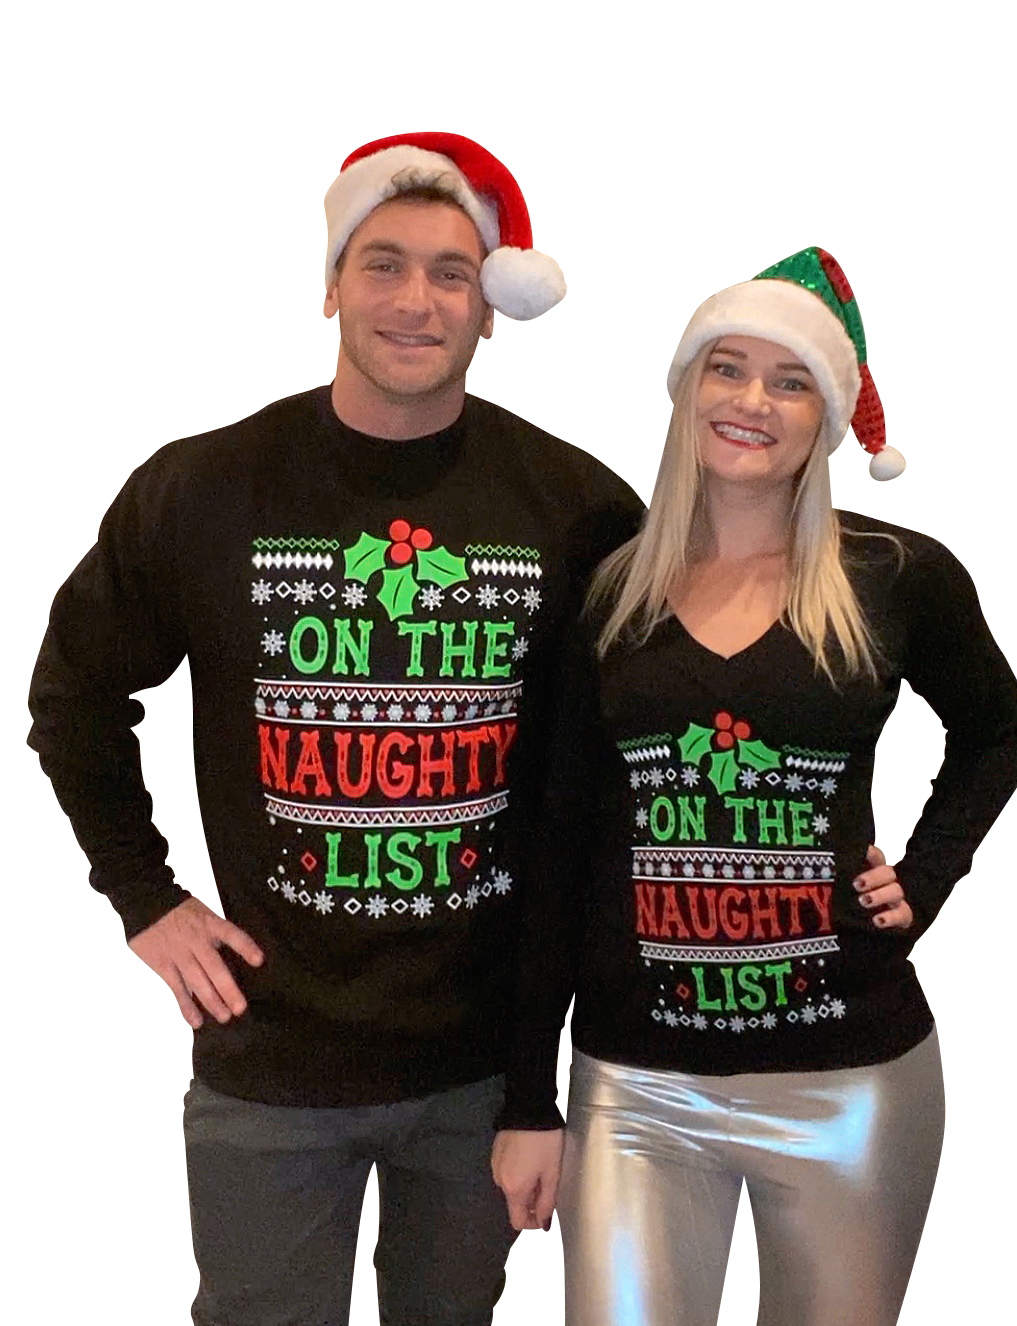 Mens Ugly Christmas Sweater: On The Naughty List Christmas Sweater ...